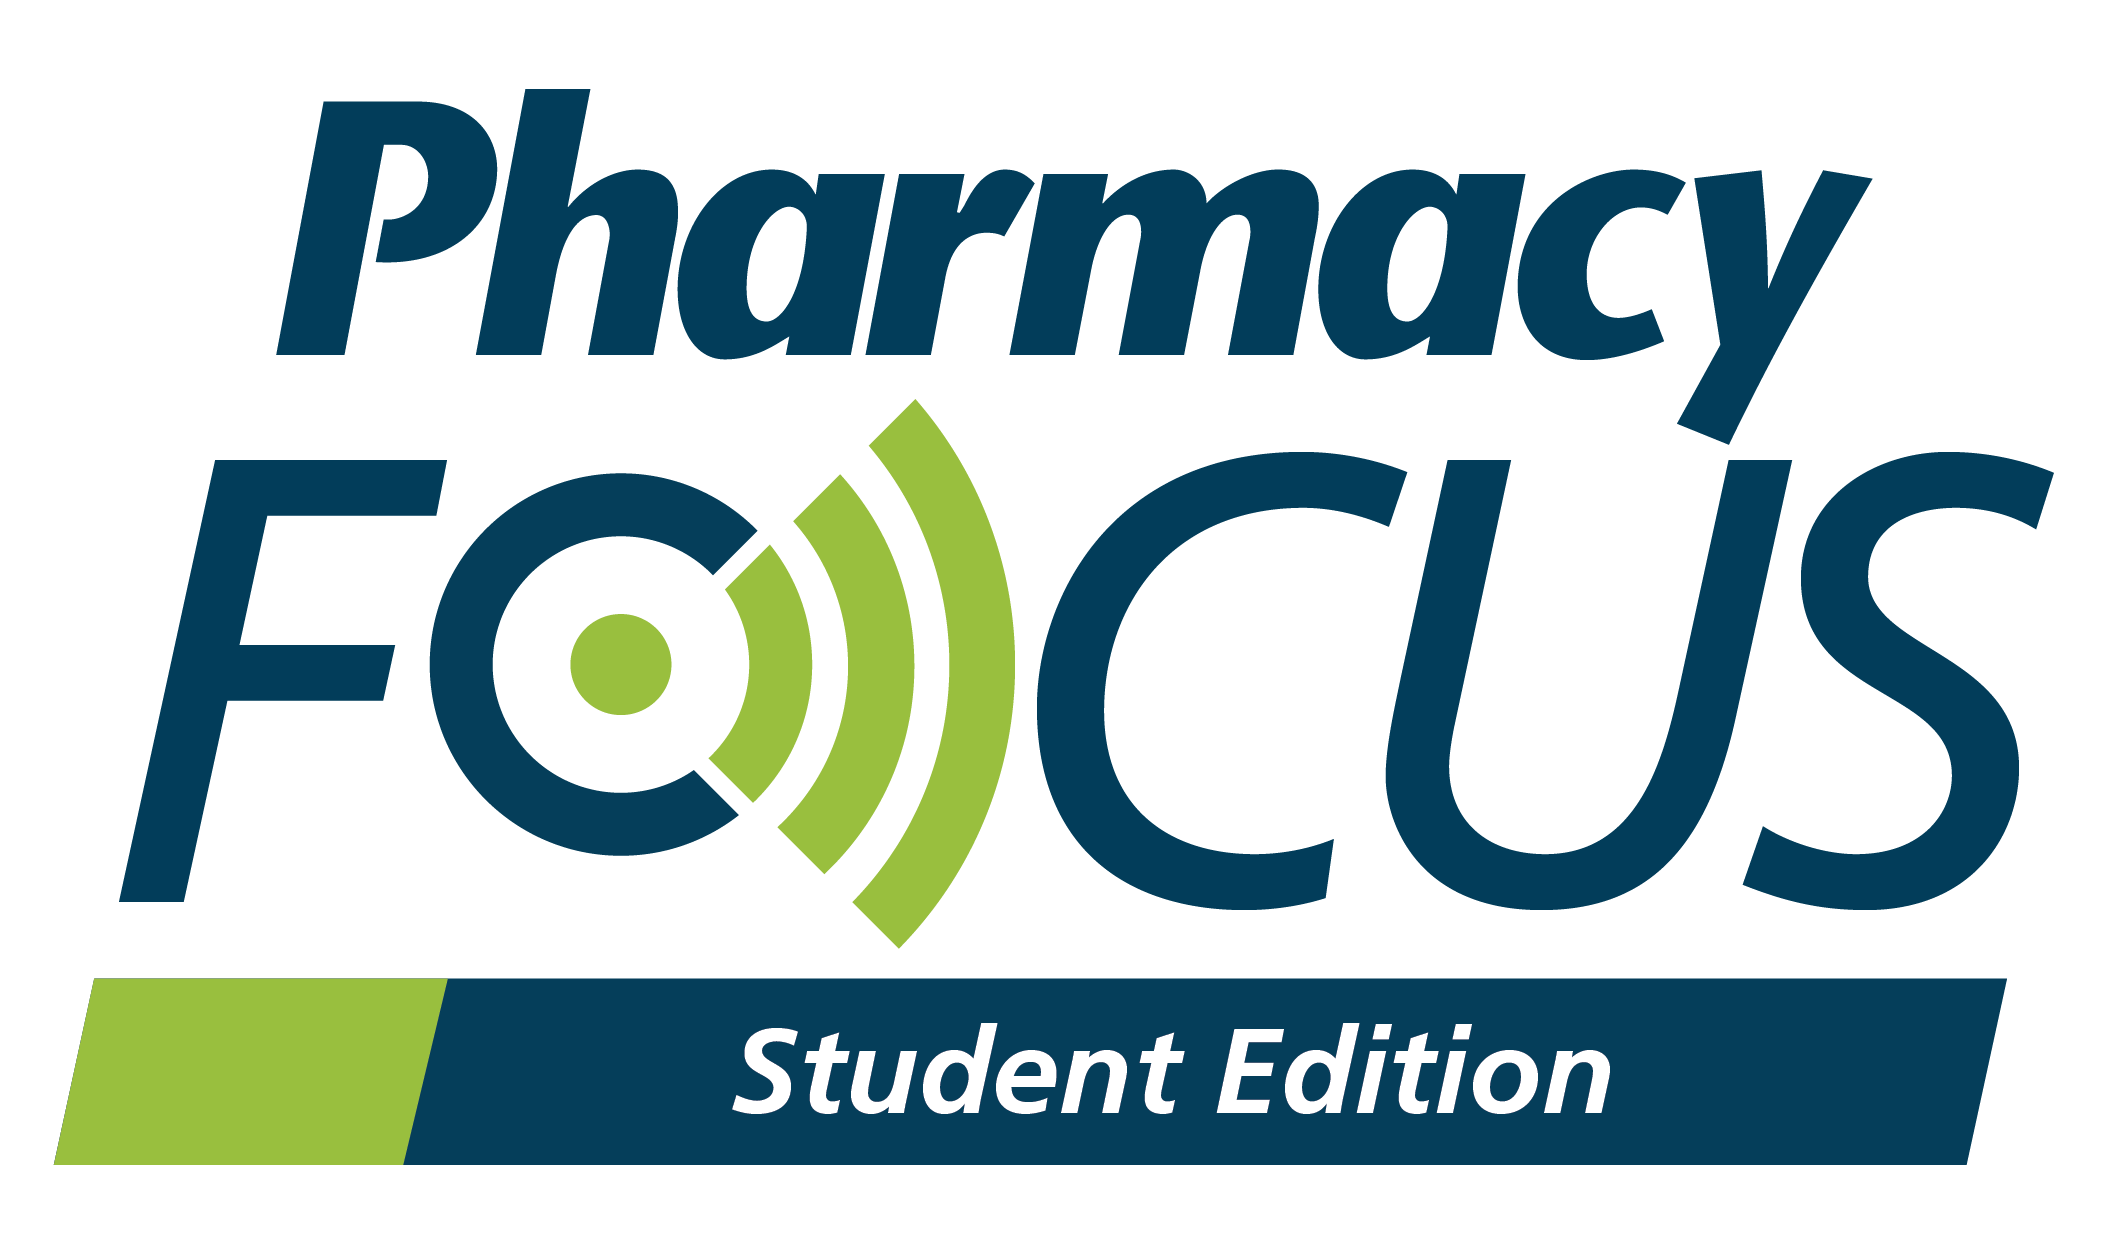 Pharmacy Focus: Student Edition - Fostering Inclusivity: Scholarships for Black Student Pharmacists